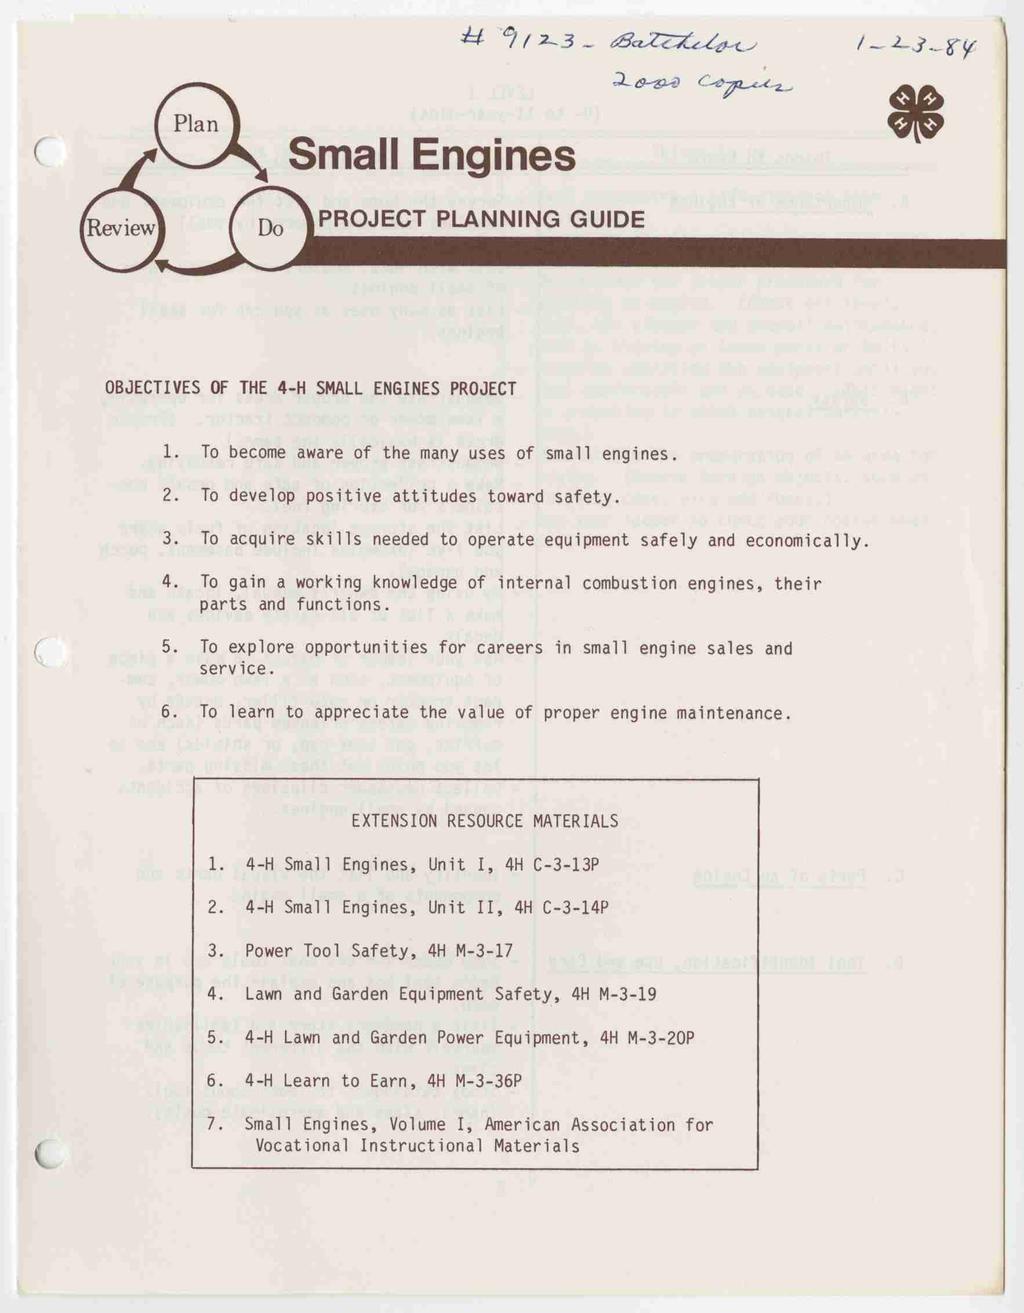 OBJECTIVES OF THE 4-H SMALL ENGINES PROJECT 1. To become aware of the many uses of small engines. 2. To develop positive attitudes toward safety. 3.